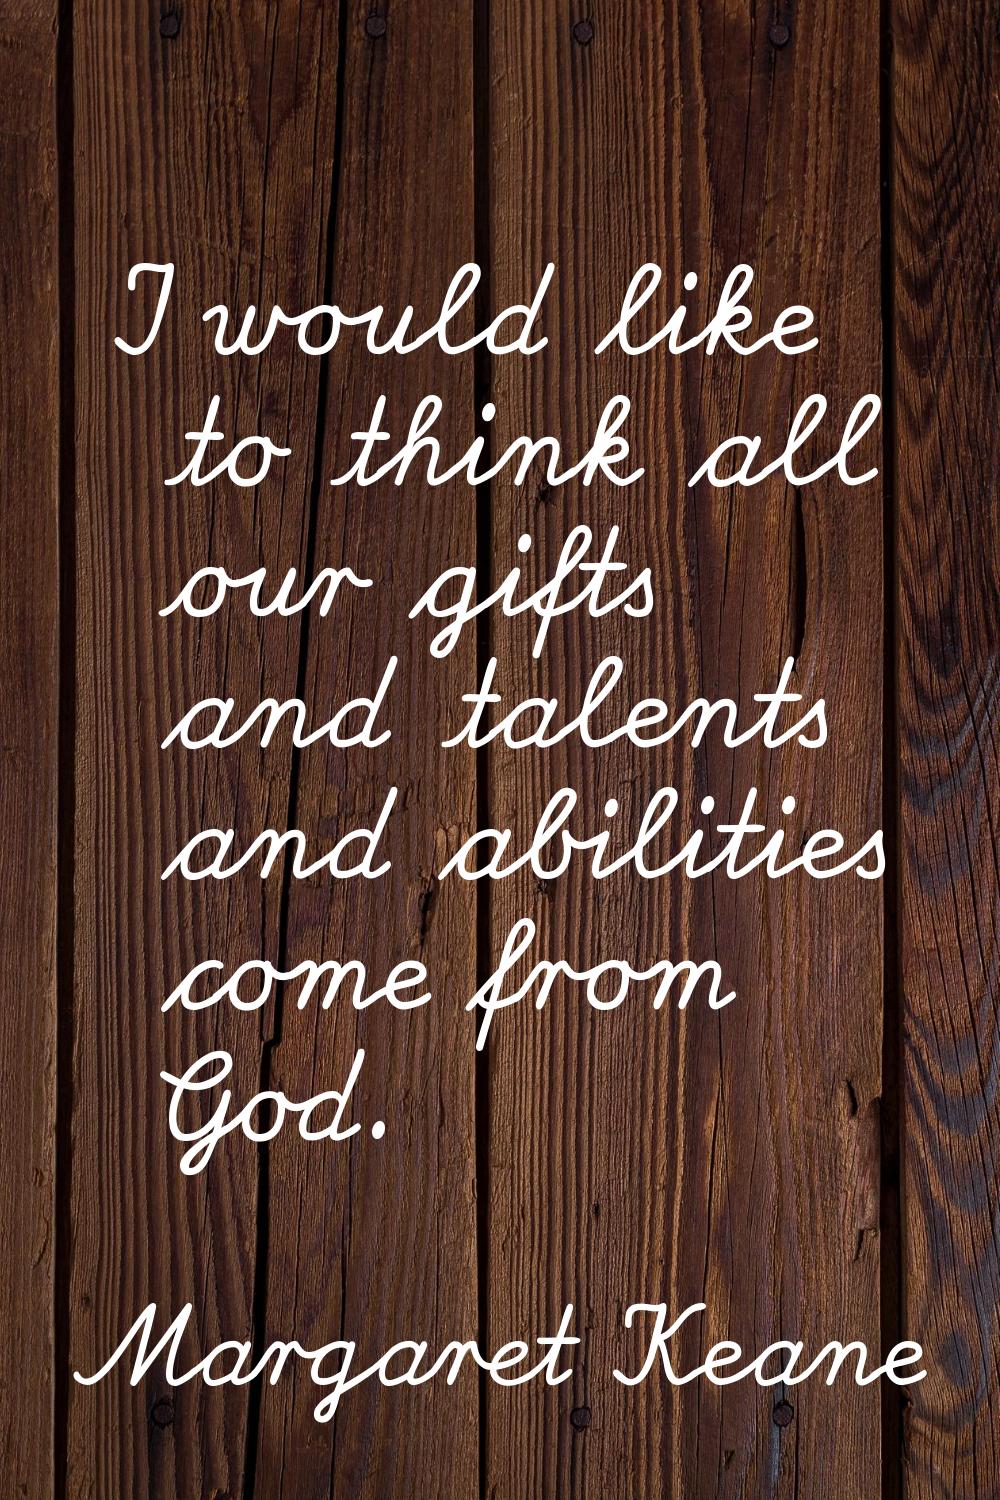 I would like to think all our gifts and talents and abilities come from God.